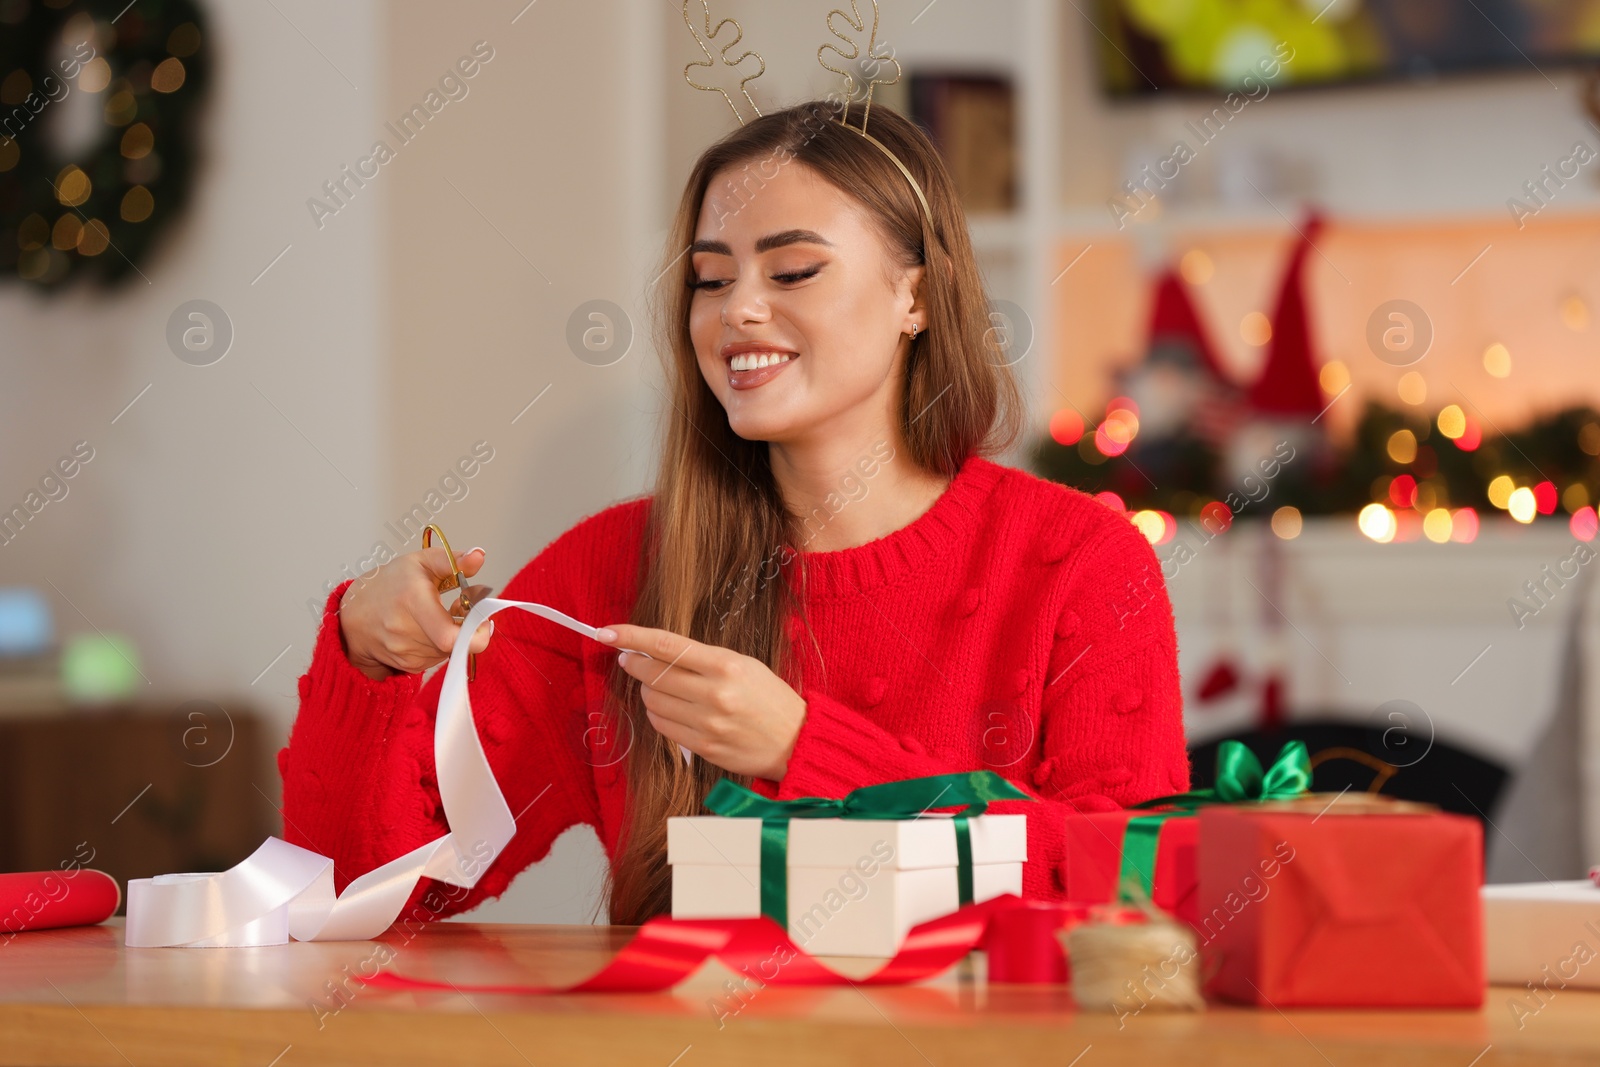 Photo of Beautiful young woman in deer headband cutting ribbon at table in room. Decorating Christmas gift